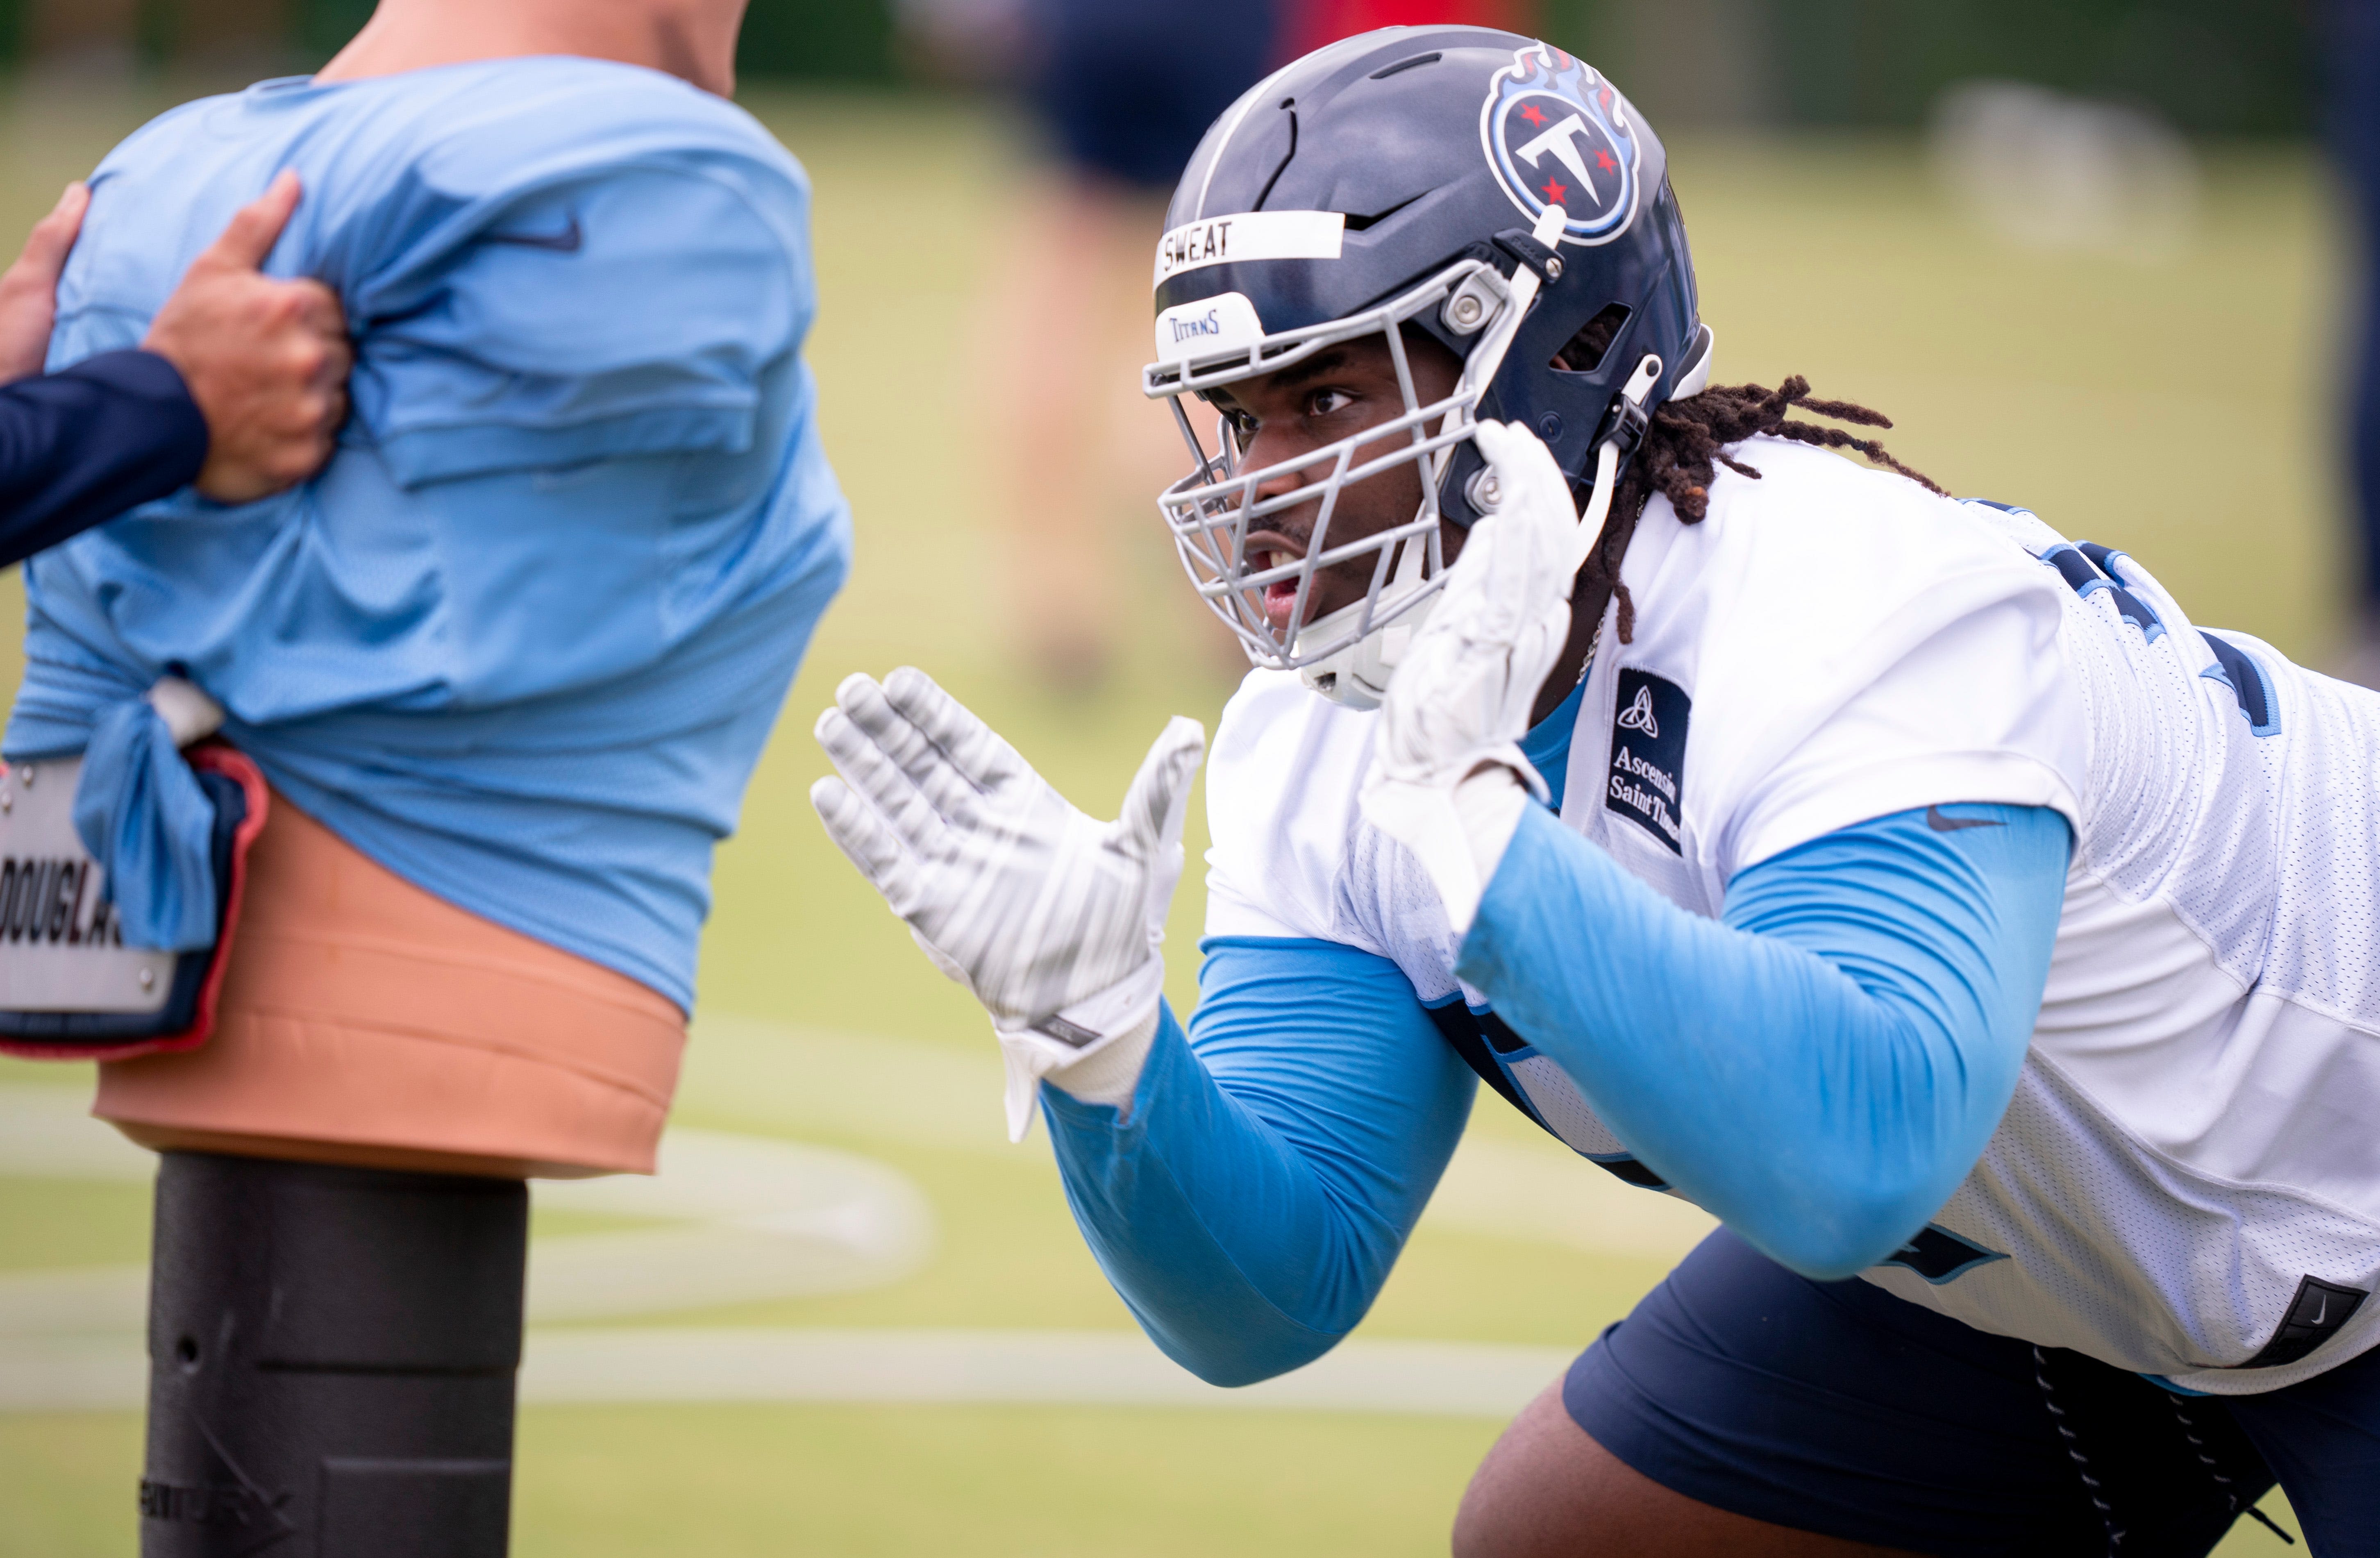 Titans T'Vondre Sweat feels great, is moving well and won't back down on where 'the real UT' is